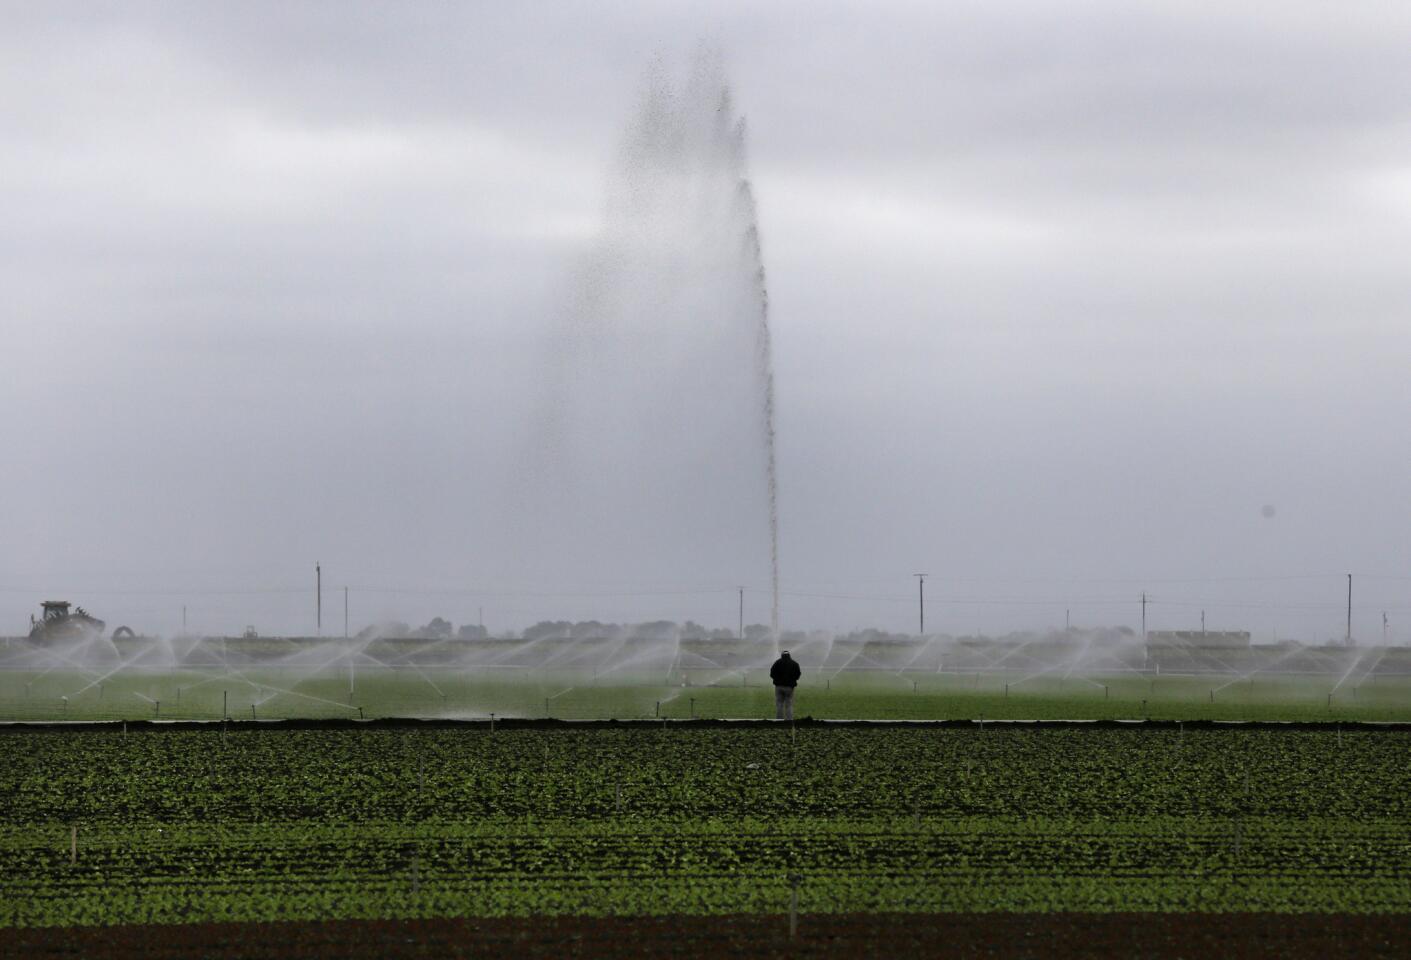 Sprinklers water a field in the early morning hours at the Tanimura & Antle farm outside Salinas. The Salinas Valley, one of California's agricultural gems, has been spared the worst of the drought unlike the neighboring San Joaquin Valley.